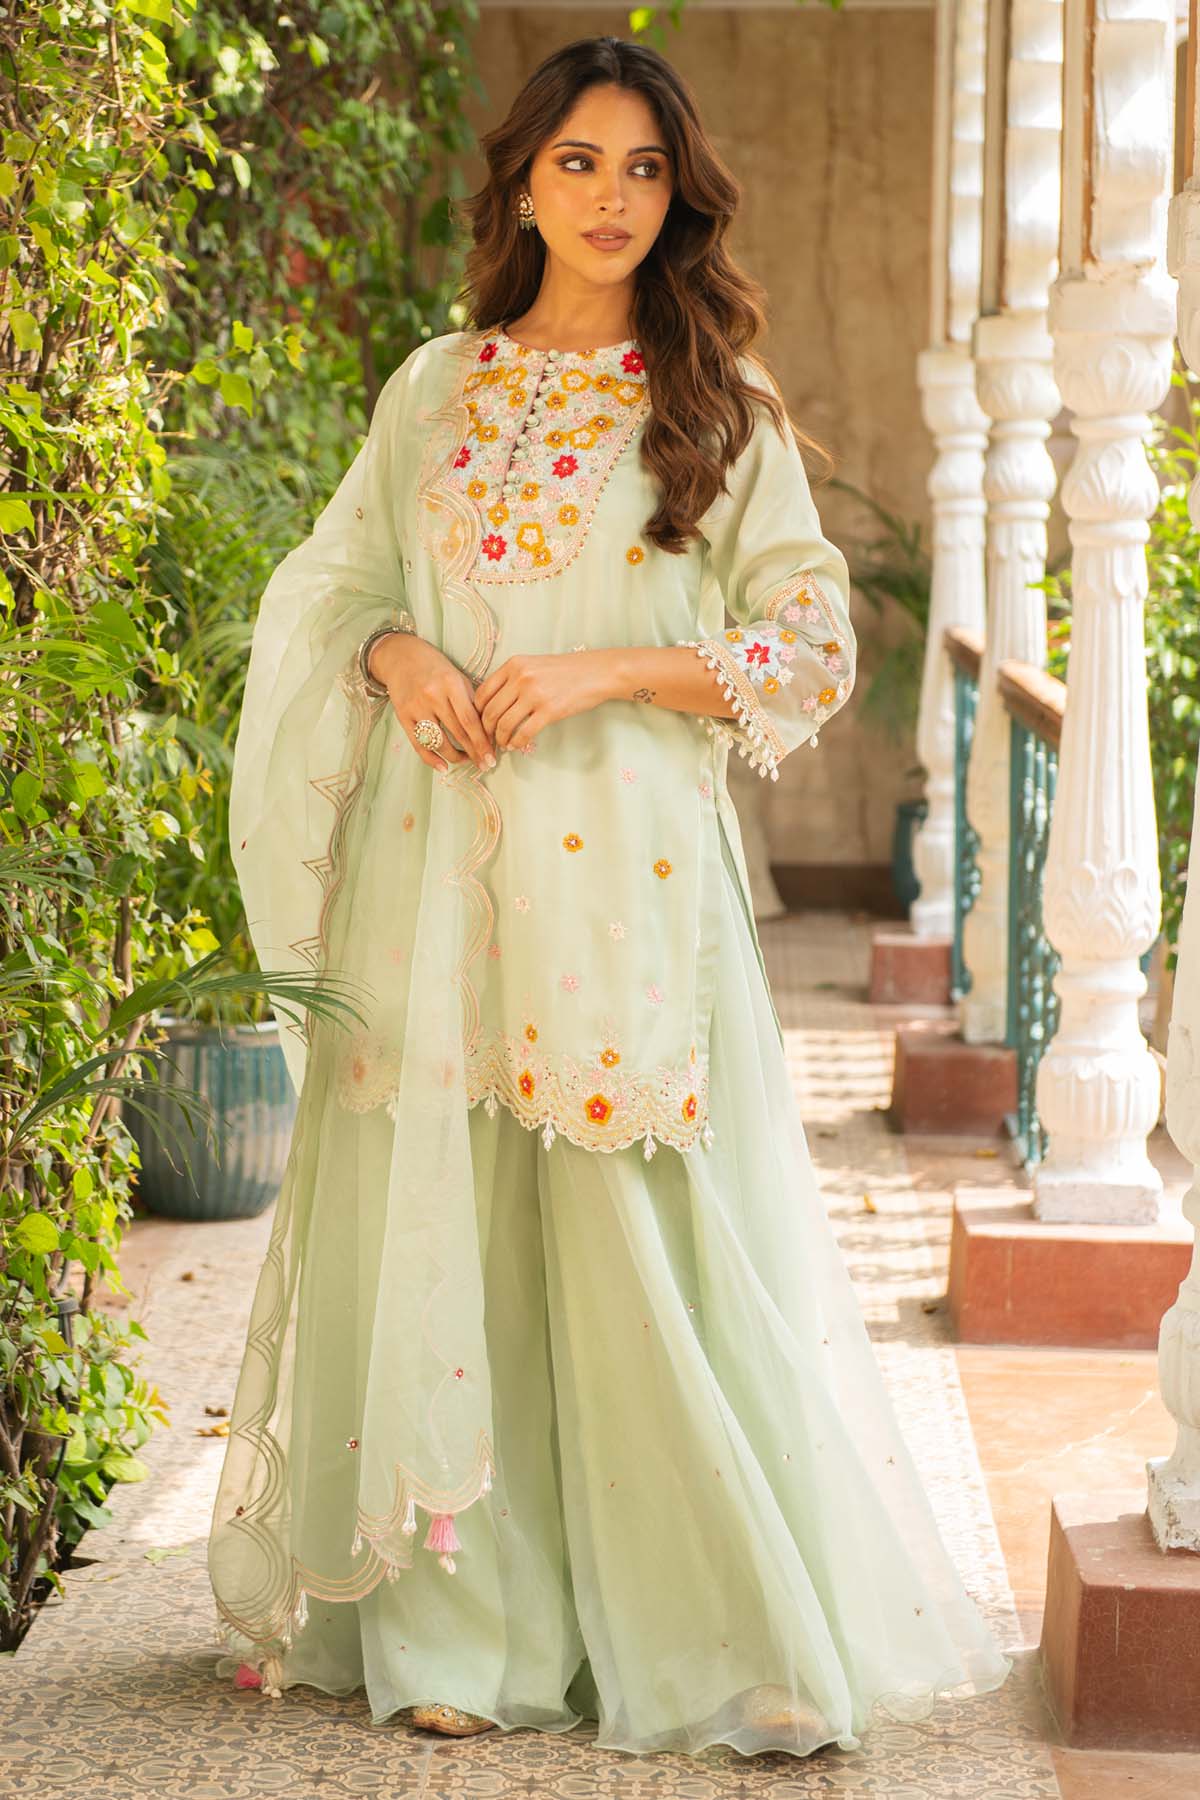 Ajiesh Oberoi Floral Embroidered Sharara Set for women online at ScrollnShops